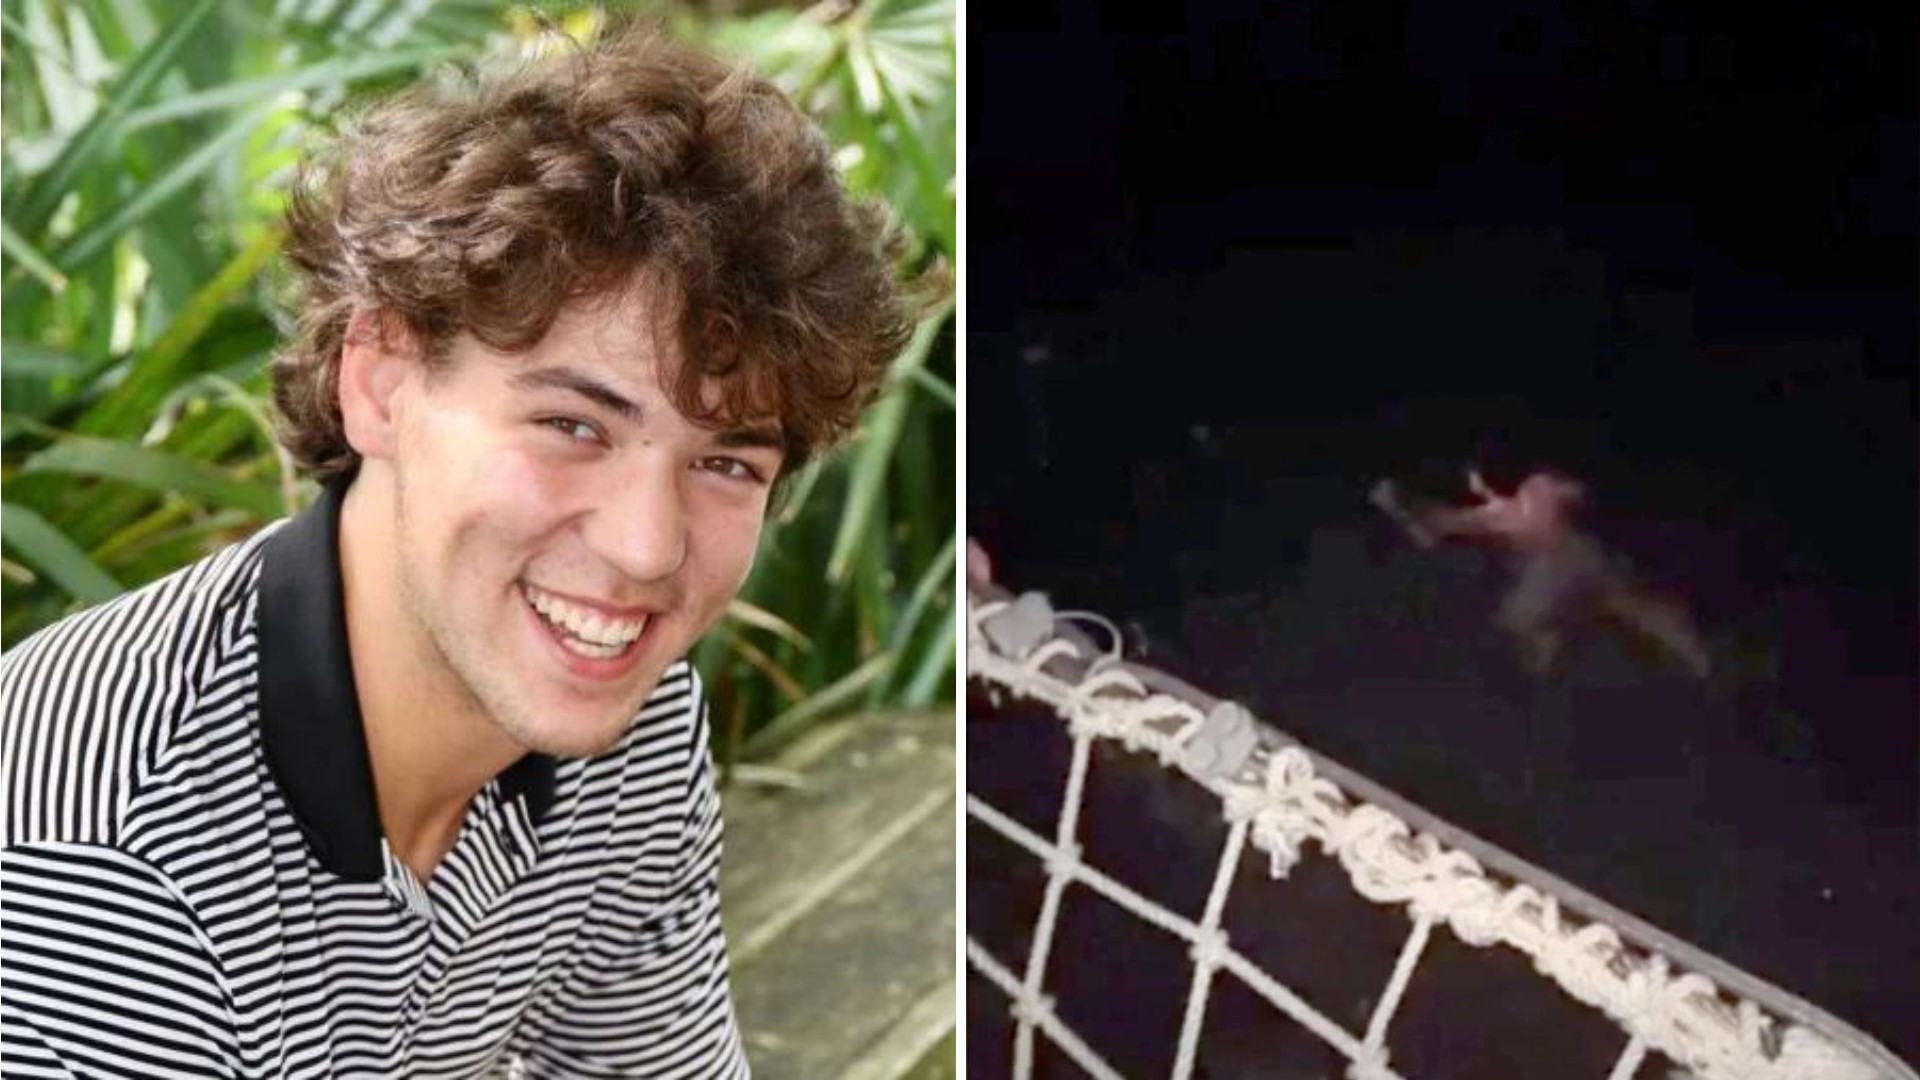 (Video) US Teen Jumps Off Cruise Ship On A Dare, Now He's Missing